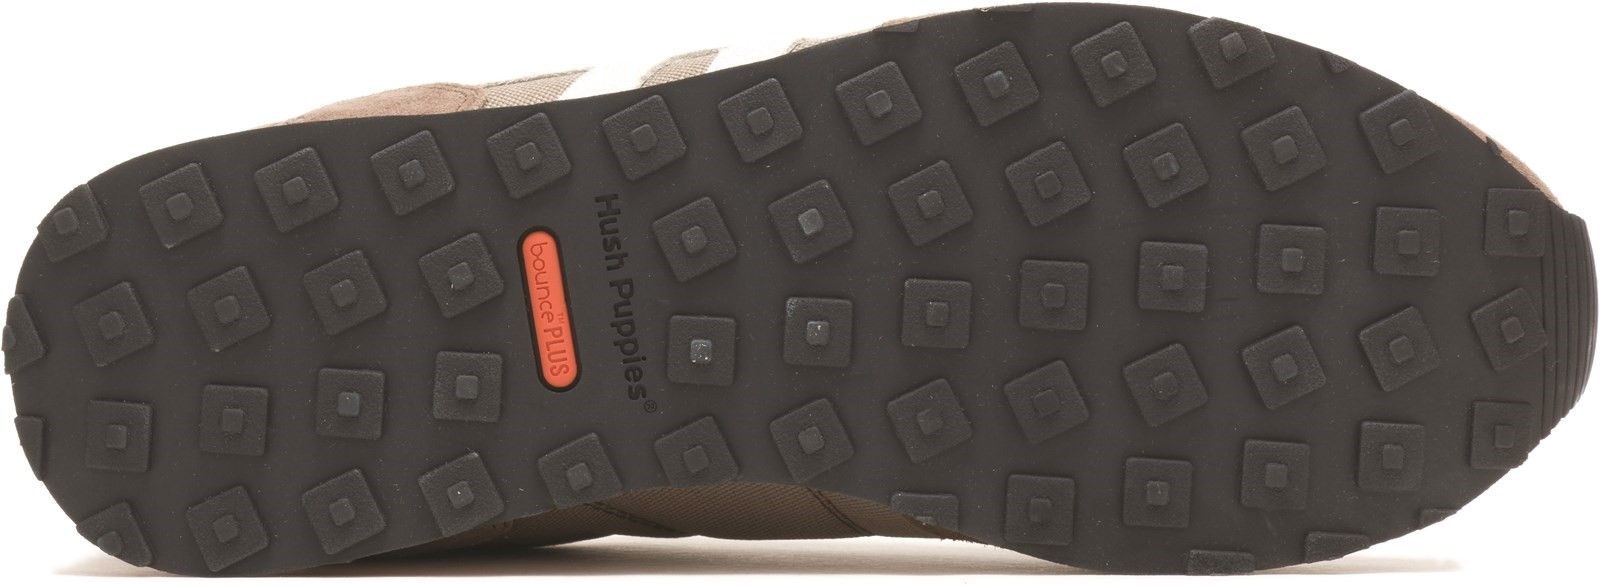 BOUNCE insole made of high rebound polyurethane compound foam provides extreme cushioning and returns energy in every step. This energizing cushion distributes weight evenly supporting the foot in total comfort.RPET (recycled) lining. 
Anti-fraying RPET (recycled) socklining. 
Removable BOUNCE footbed. 
Slip lasted Strobel construction for flexibility and comfort. 
Cut and buff EVA classic midsole.